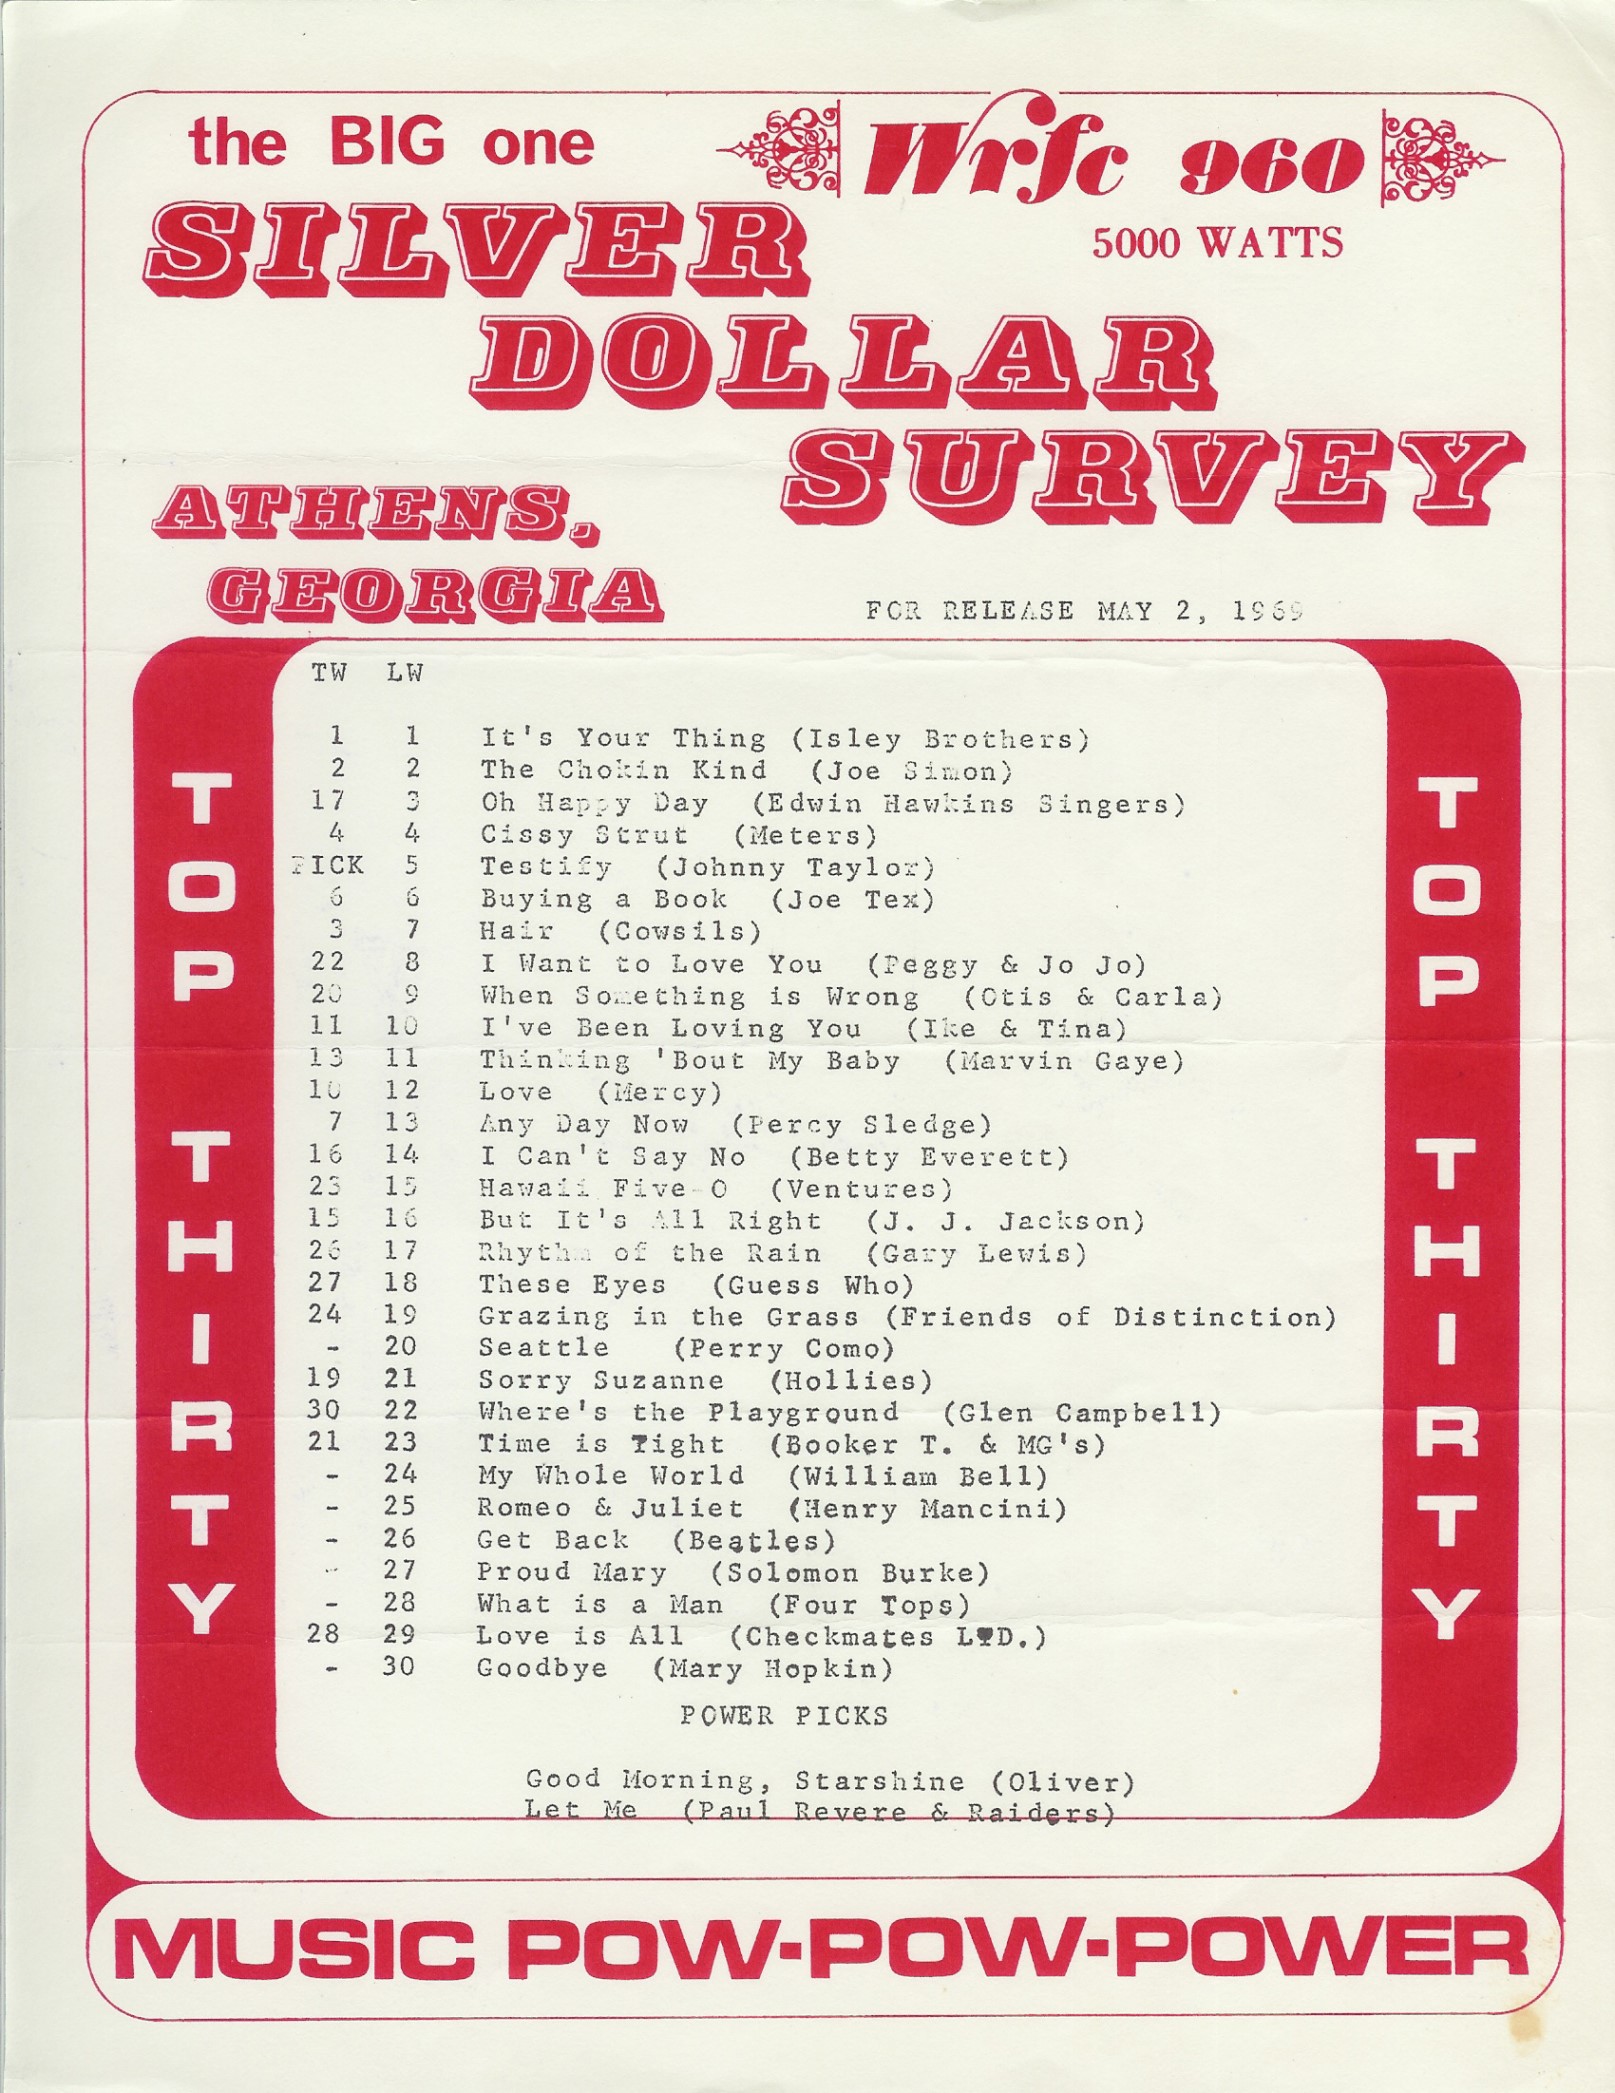 Red and white image of a WFRc (Athens) radio station Silver Dollar Survey from 1969